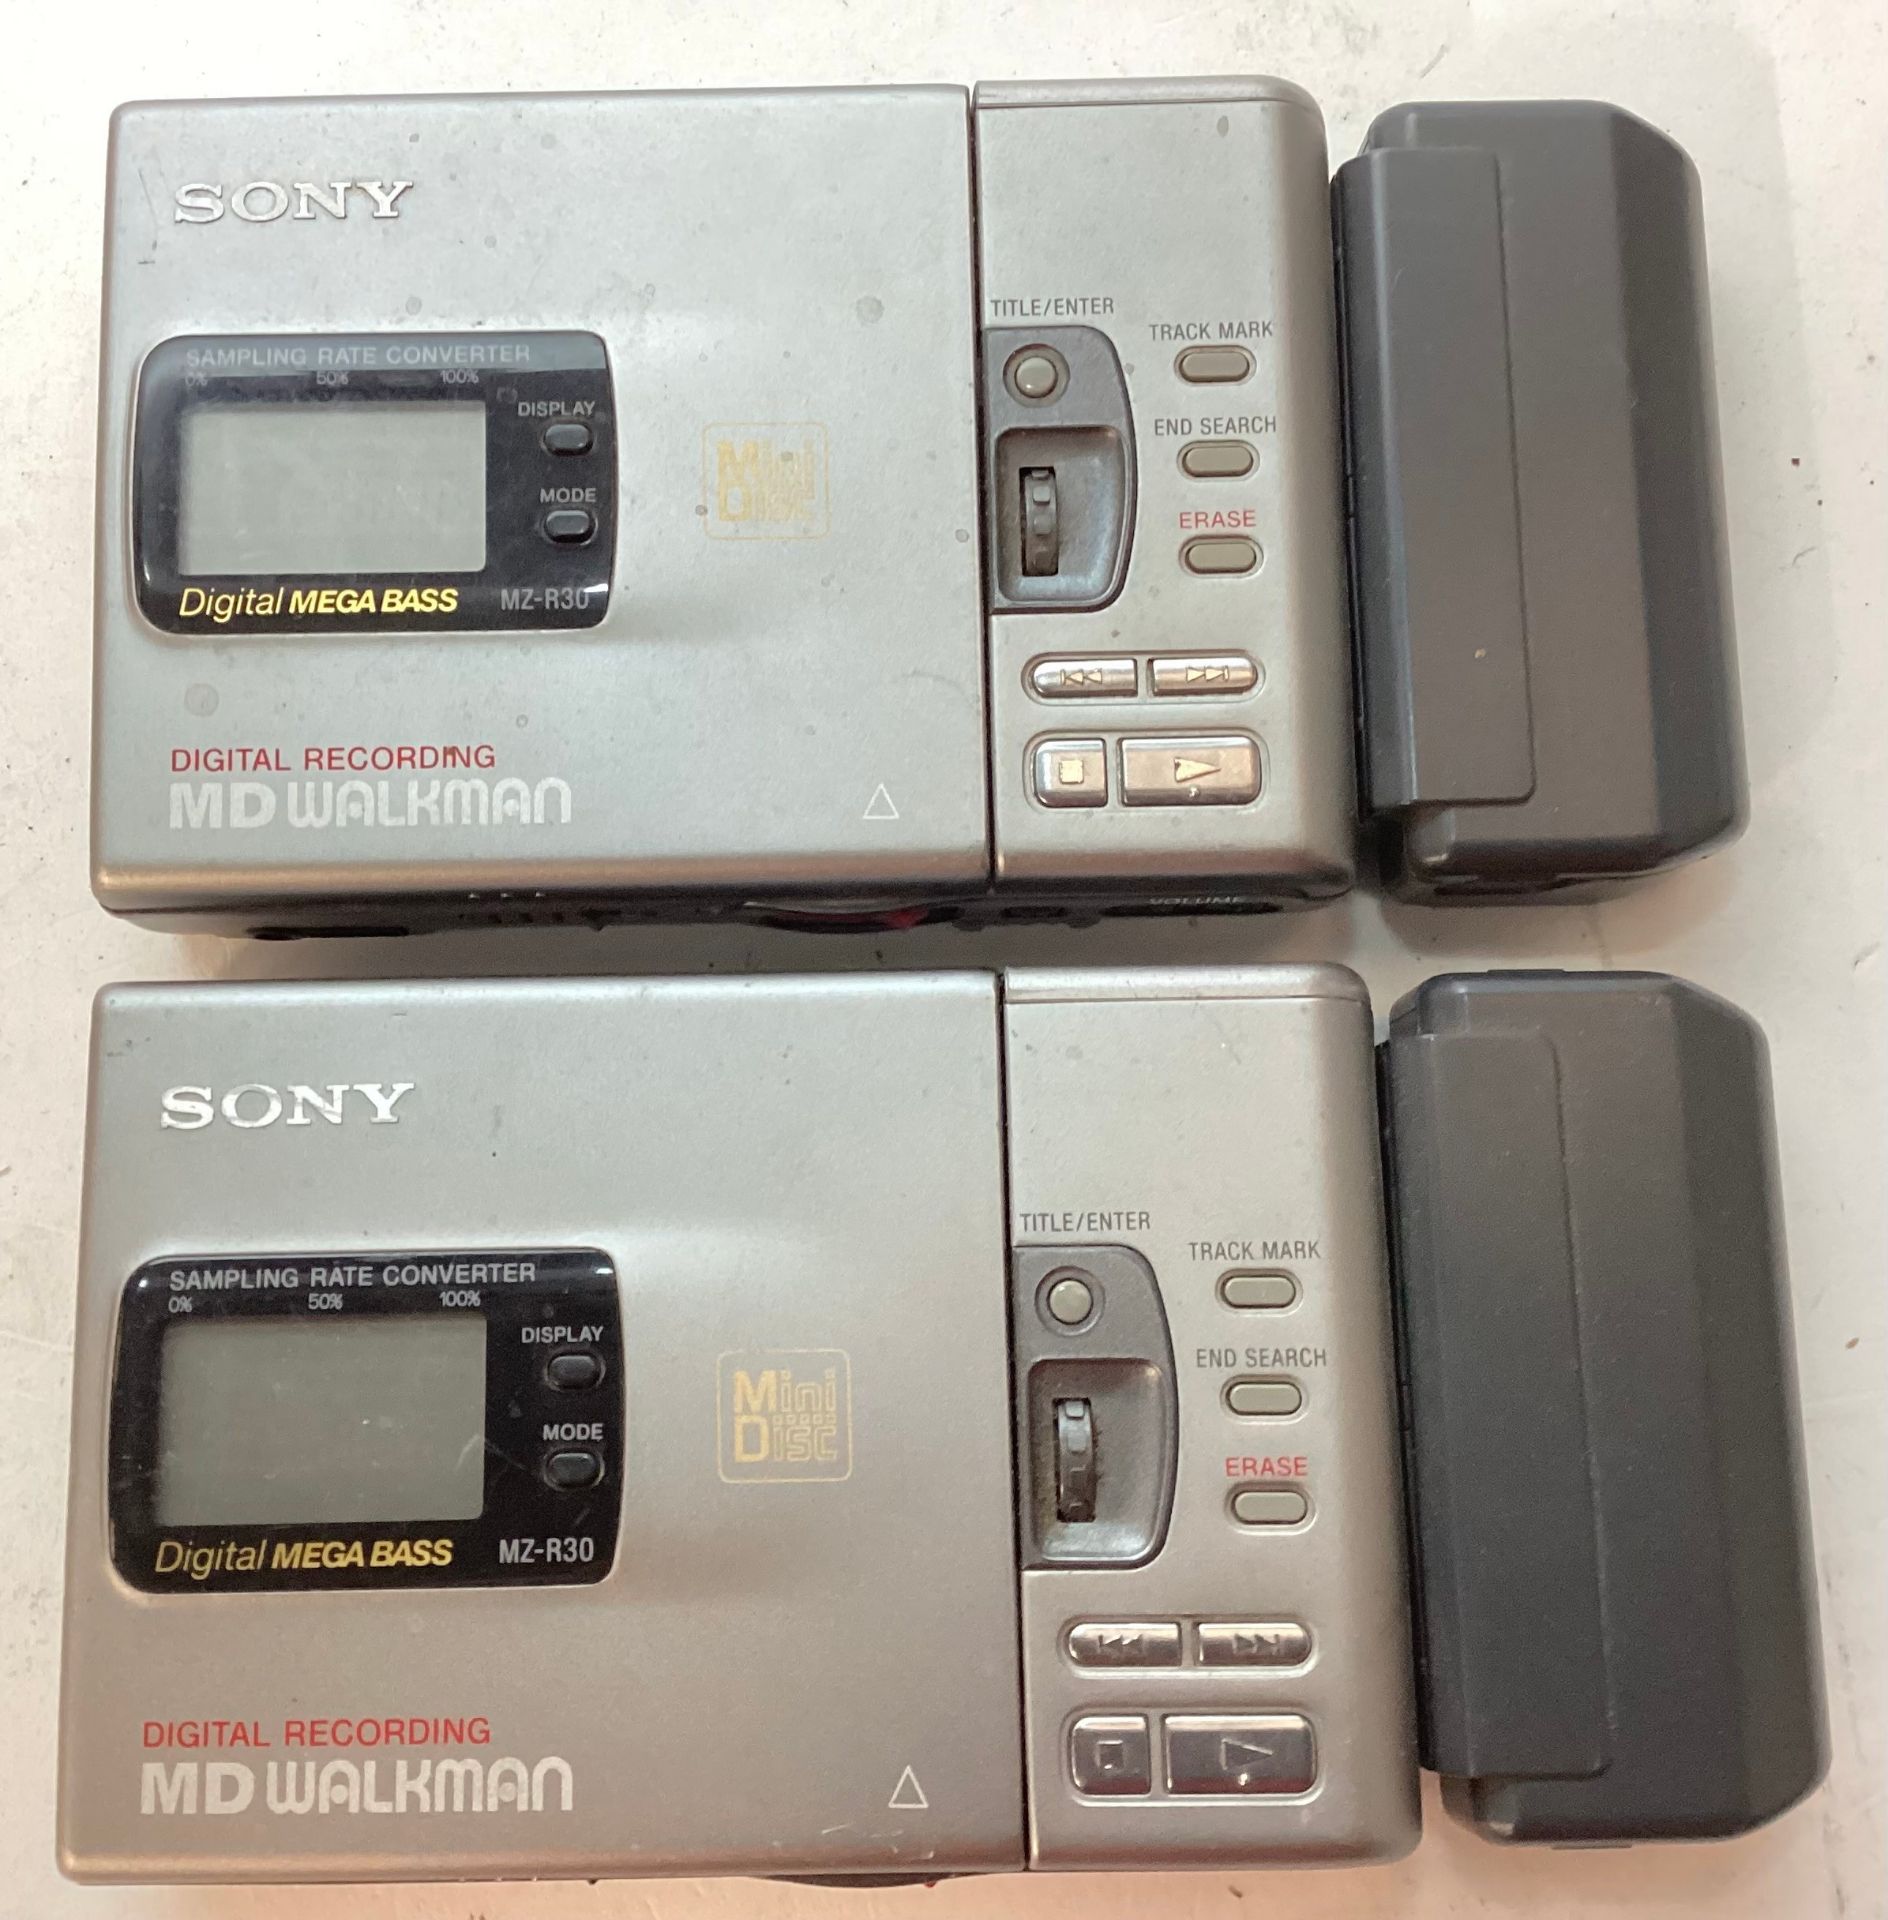 SONY MINI-DISC PLAYERS X 2. These are digital minidisc players/ recorders. They are model No. MZ-